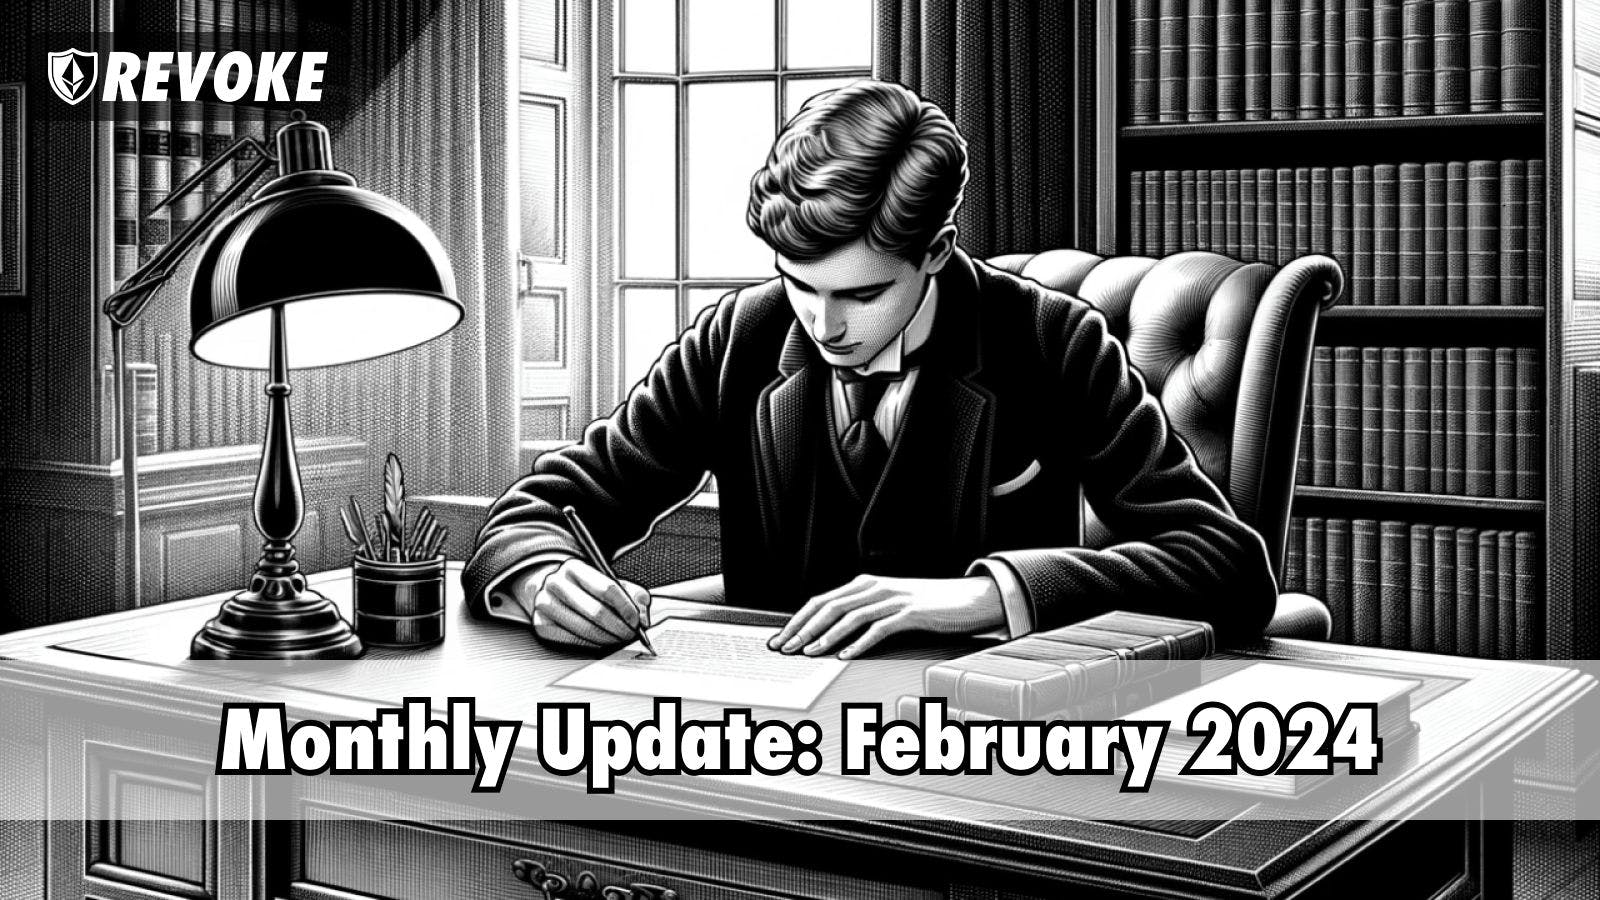 Monthly Update: February 2024 Cover Image